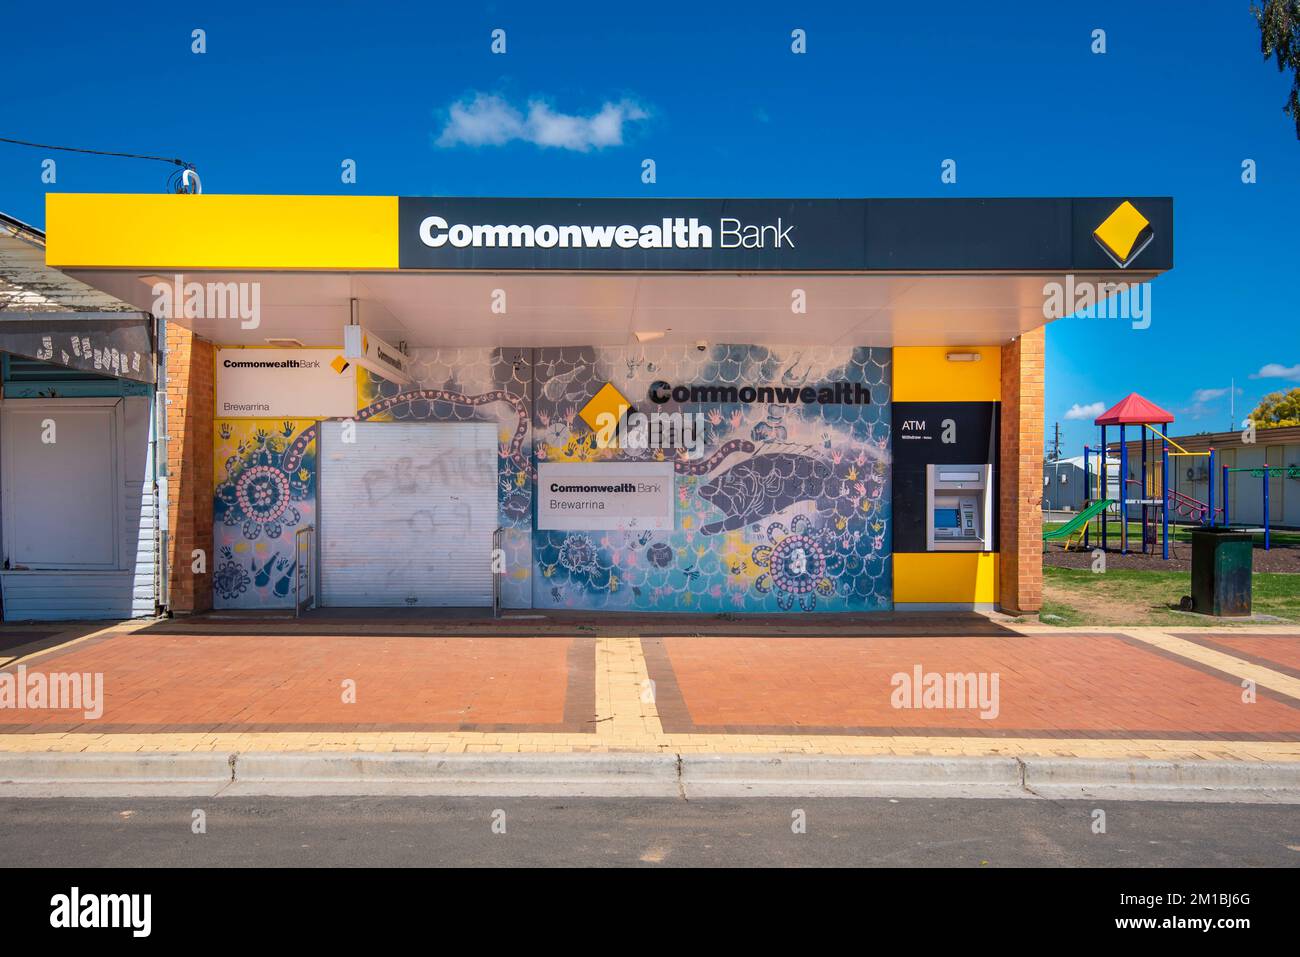 The Commonwealth Bank branch (closed on Sundays) in the main street of the New South Wales outback town of Brewarrina in Australia Stock Photo